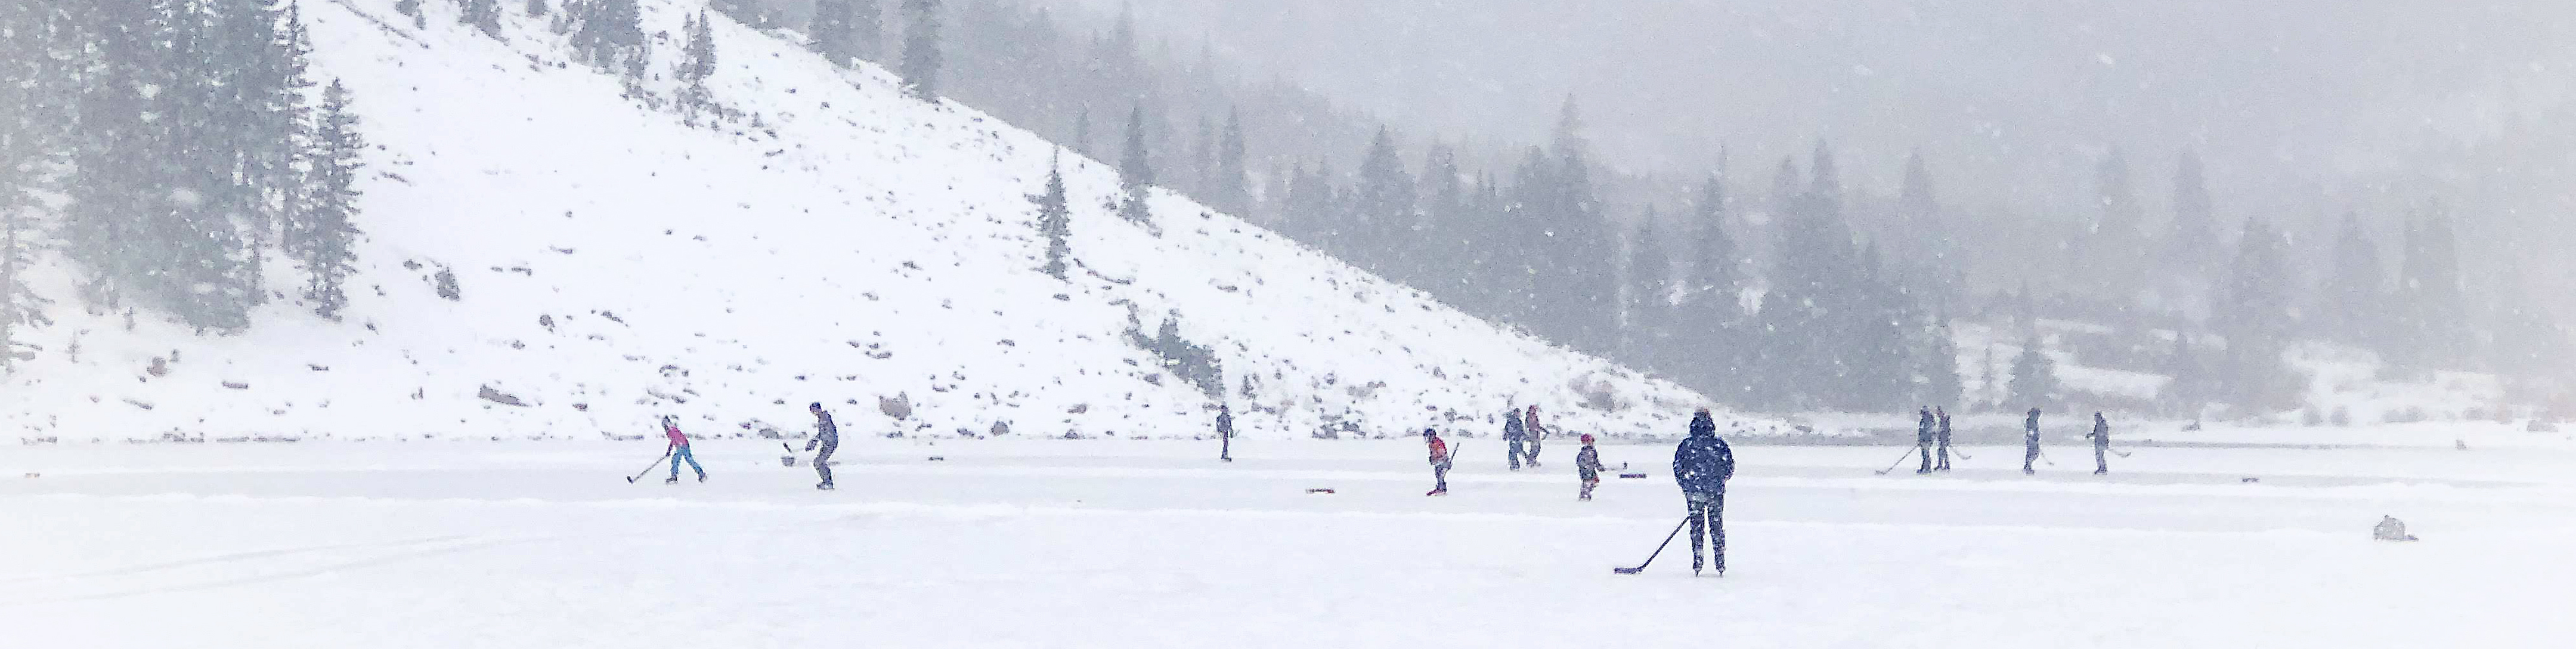 Hockey is a favorite pastime in Aspen and a post card experience when played on Maroon Lake in an early winter snow fall